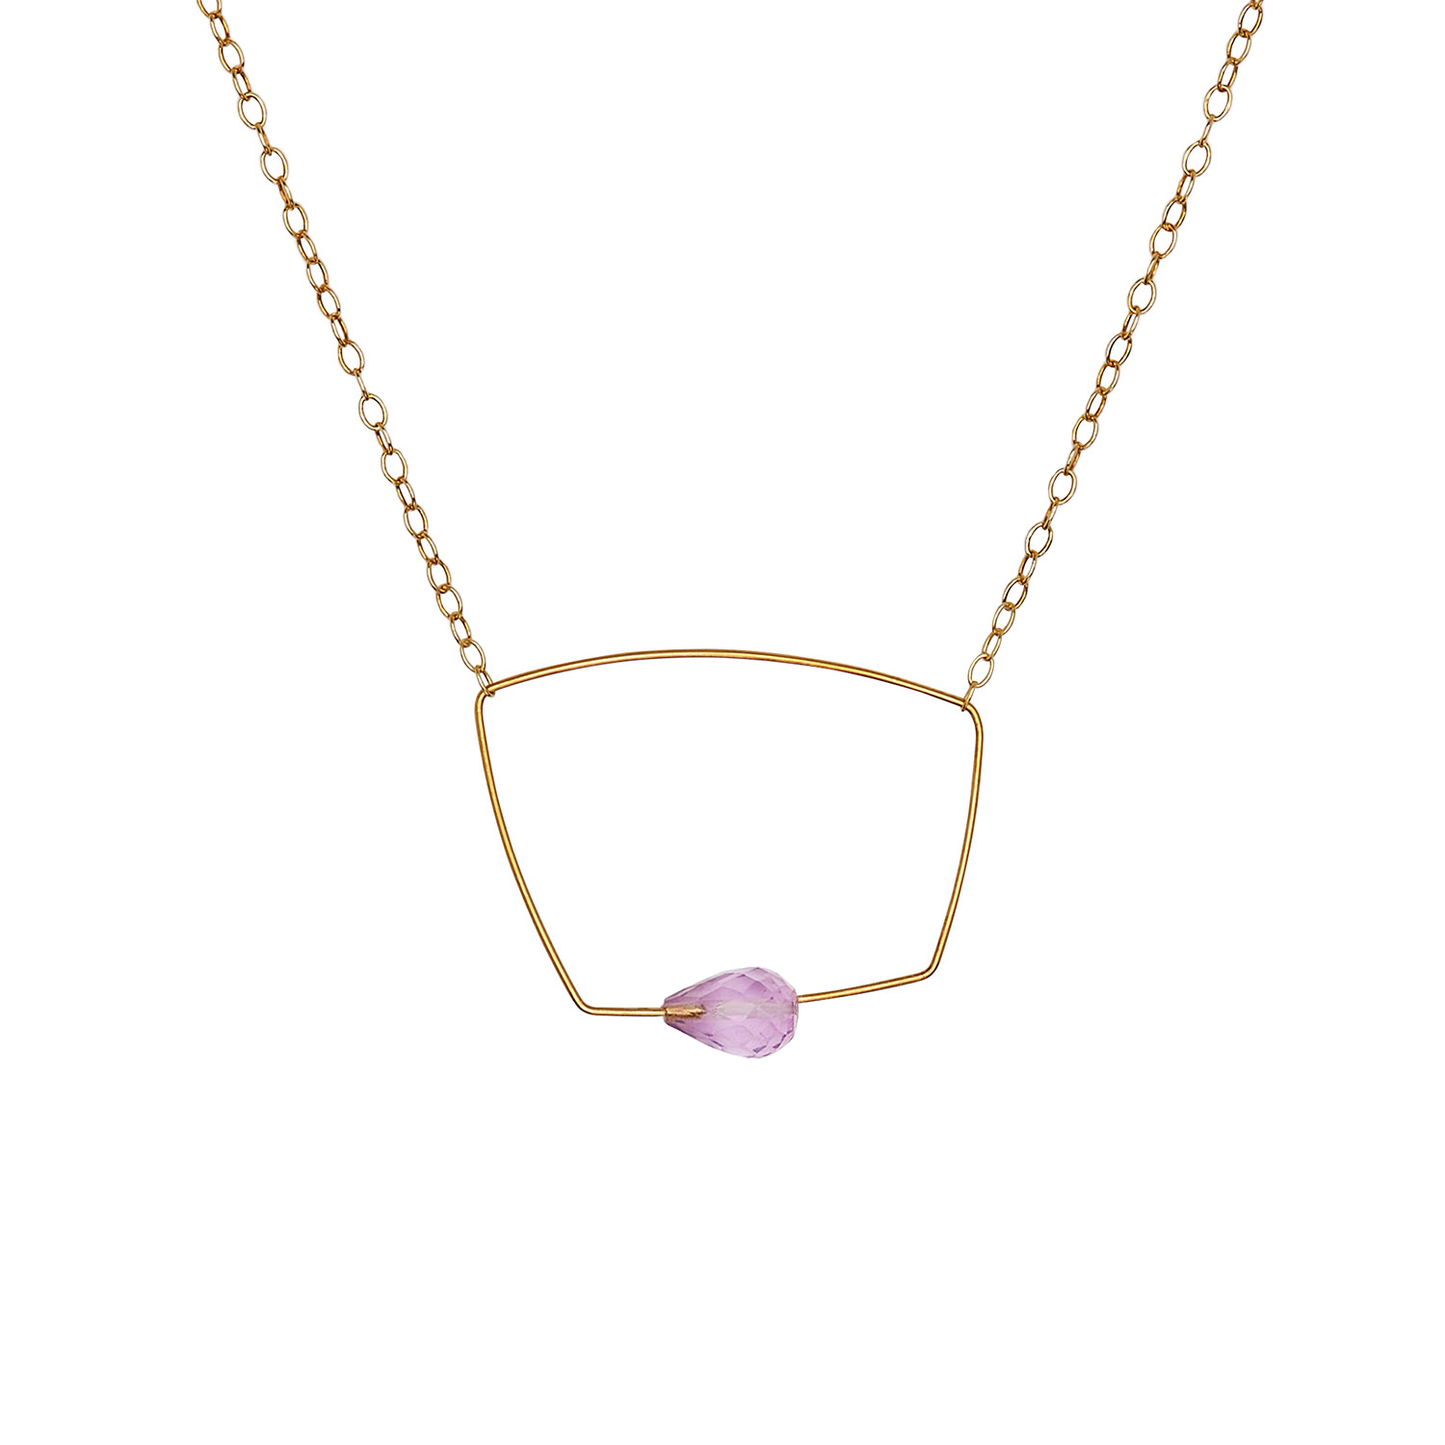 Asymmetric Square Pendant Necklace with hand-cut Gemstones